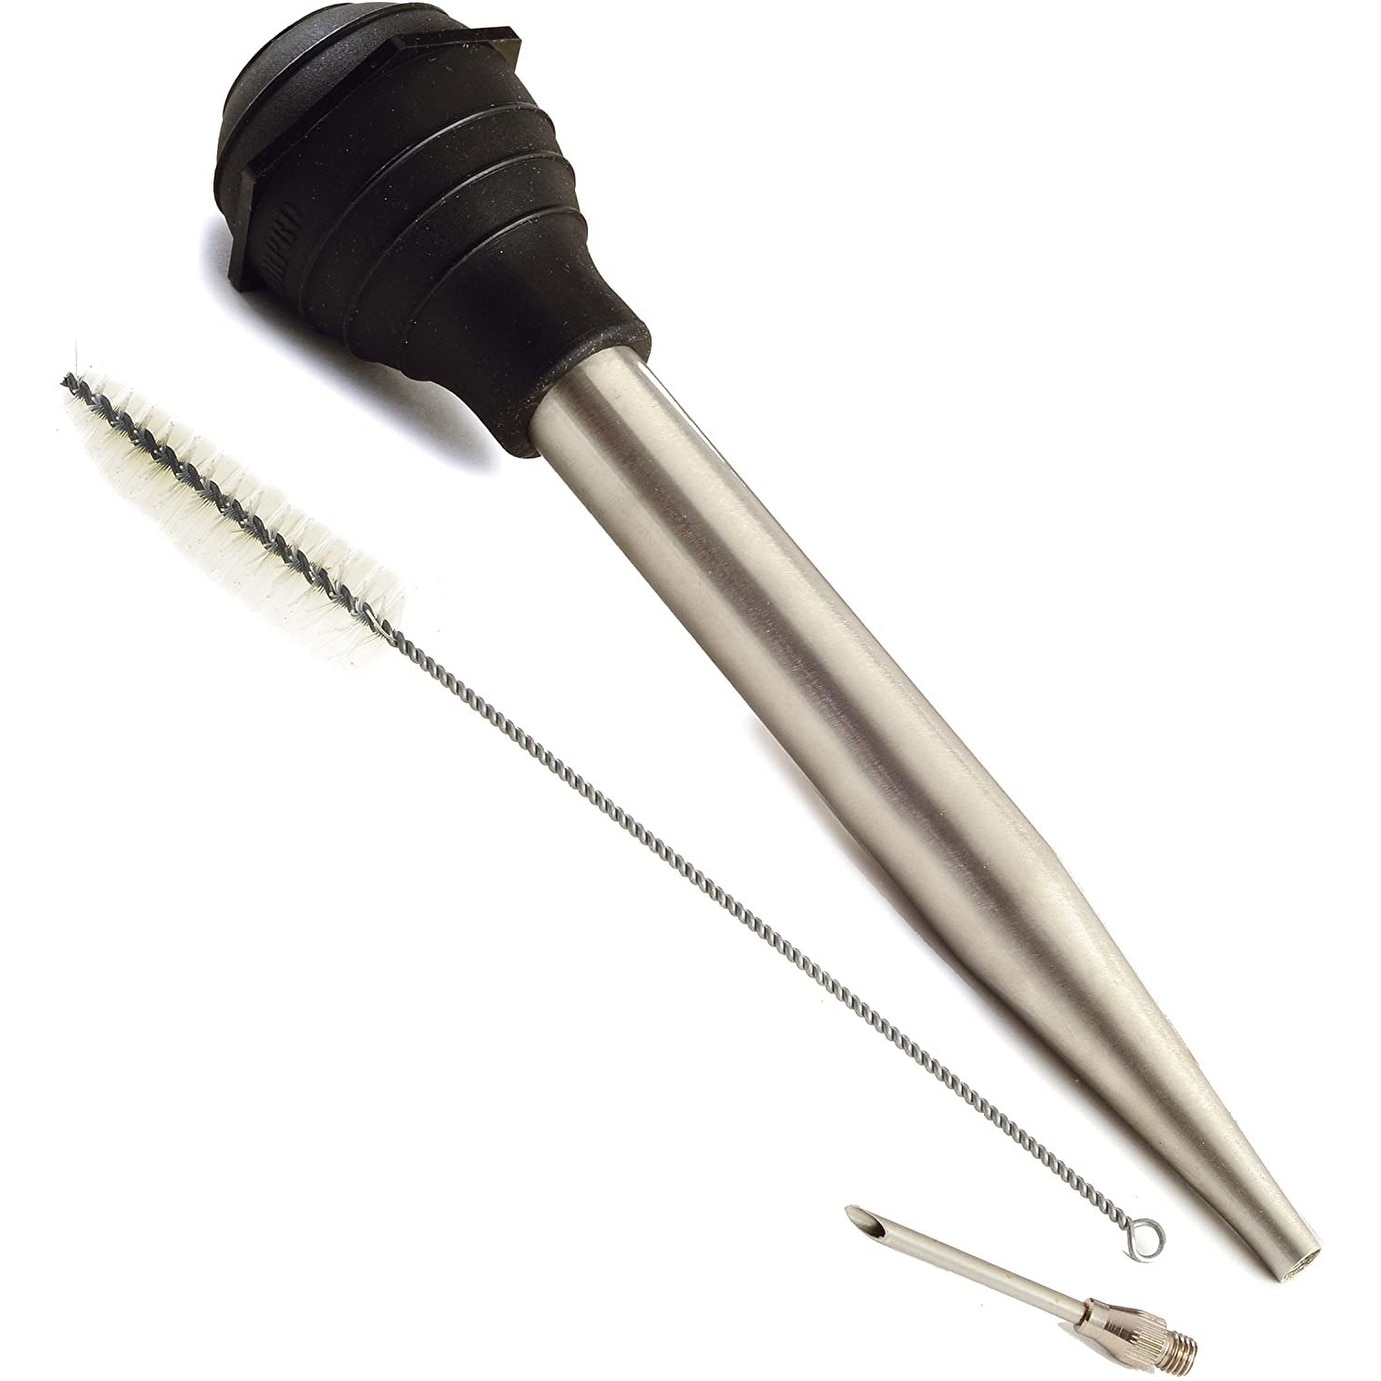 https://ak1.ostkcdn.com/images/products/is/images/direct/357ce6c9a2cdcd6384eb1b418341faf44bd37a02/Norpro-Deluxe-Stainless-Steel-Turkey-Baster-with-Flavor-Injector-and-Cleaning-Brush.jpg